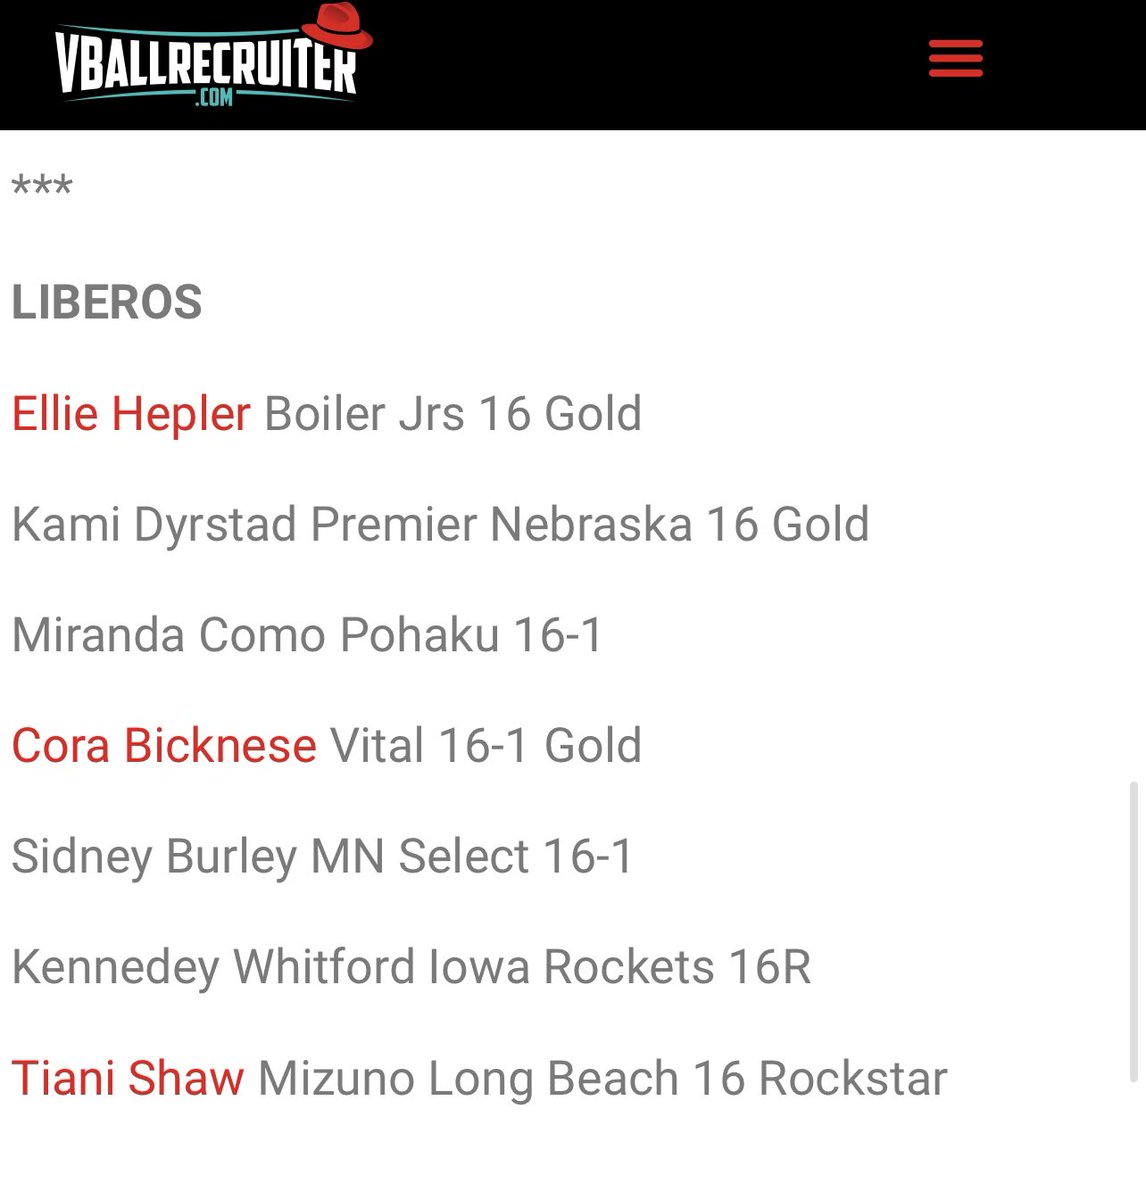 Thank you @VBallrecruiter and @cjtobolski22 for the recognition. @BoilerJuniorsVB 16 Gold had a great weekend together! Proud to see my teammates on this list!!! @TAVCRecruiting @DukeVB @IndianaVB @NDvolleyball @KStateVB @RUvball @WakeVolleyball @UWVolleyball @KentuckyVB